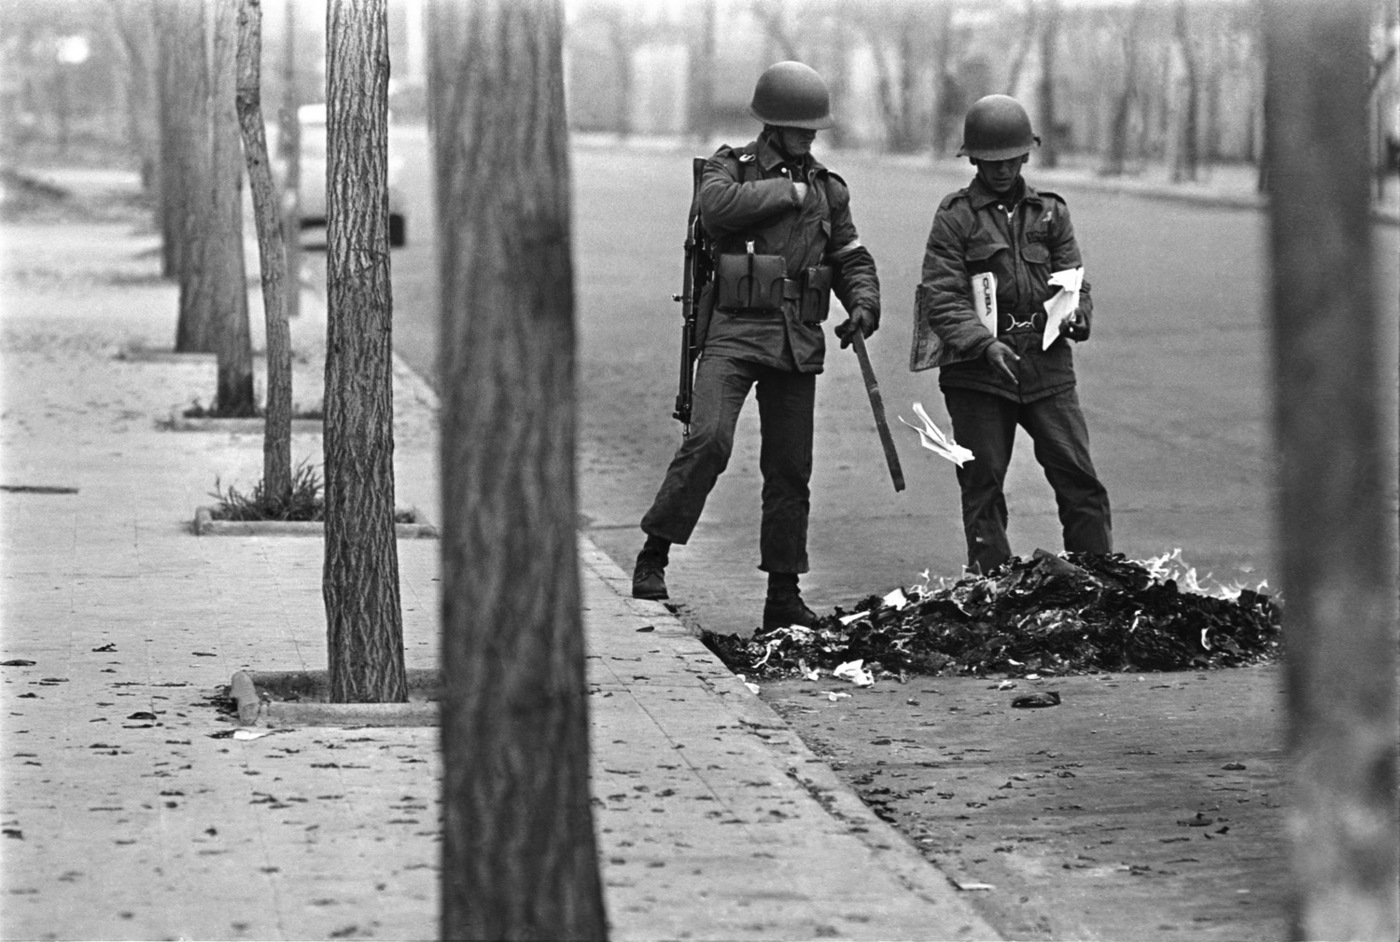 Soldiers burn confiscated books, Santiago : Chile: 40 Years After the Coup d'Etat : David Burnett | Photographer